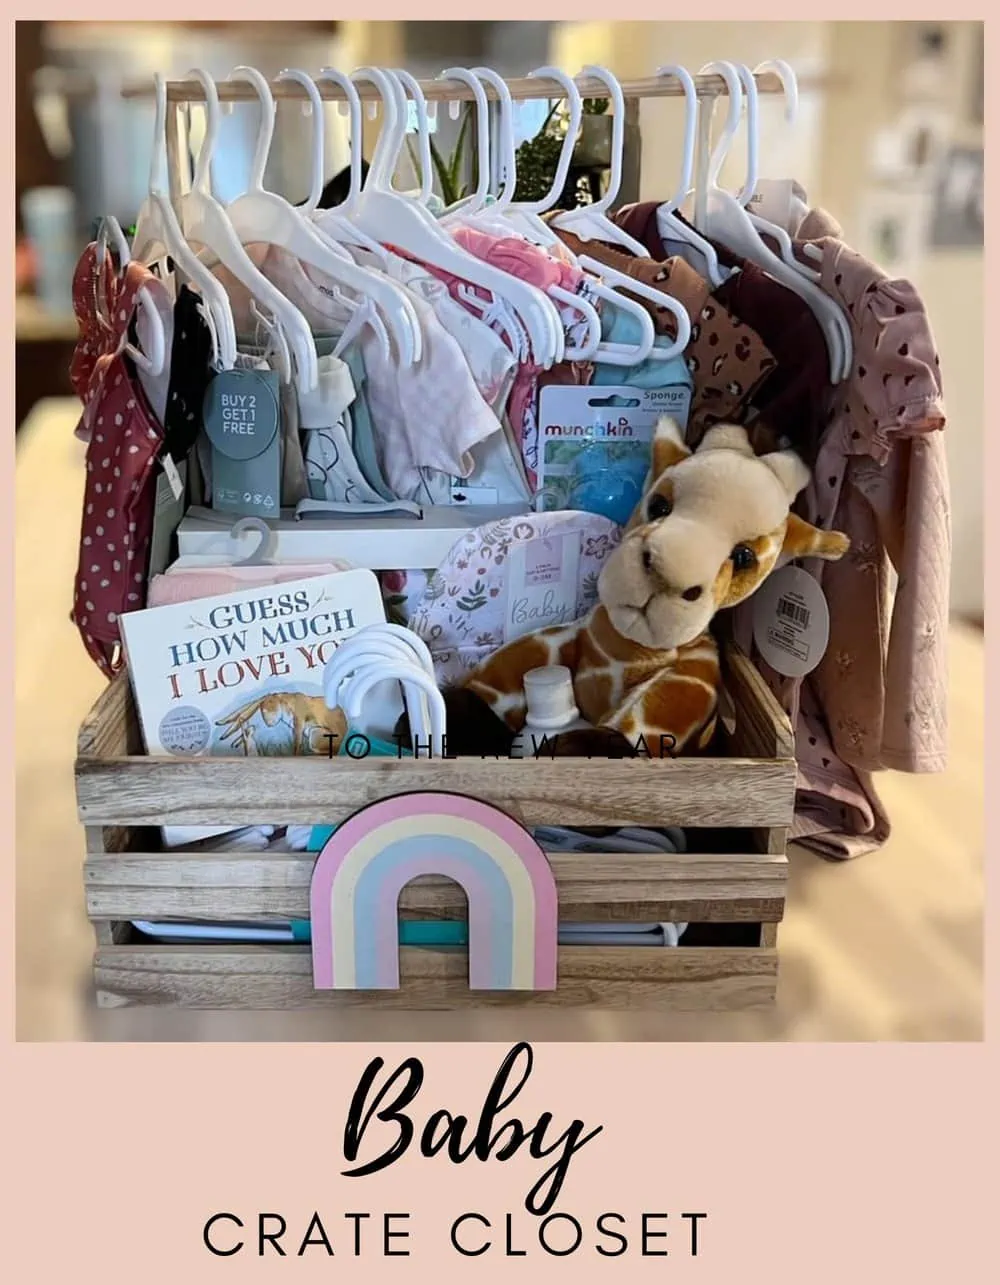 Baby Shower Gifts from $6.99